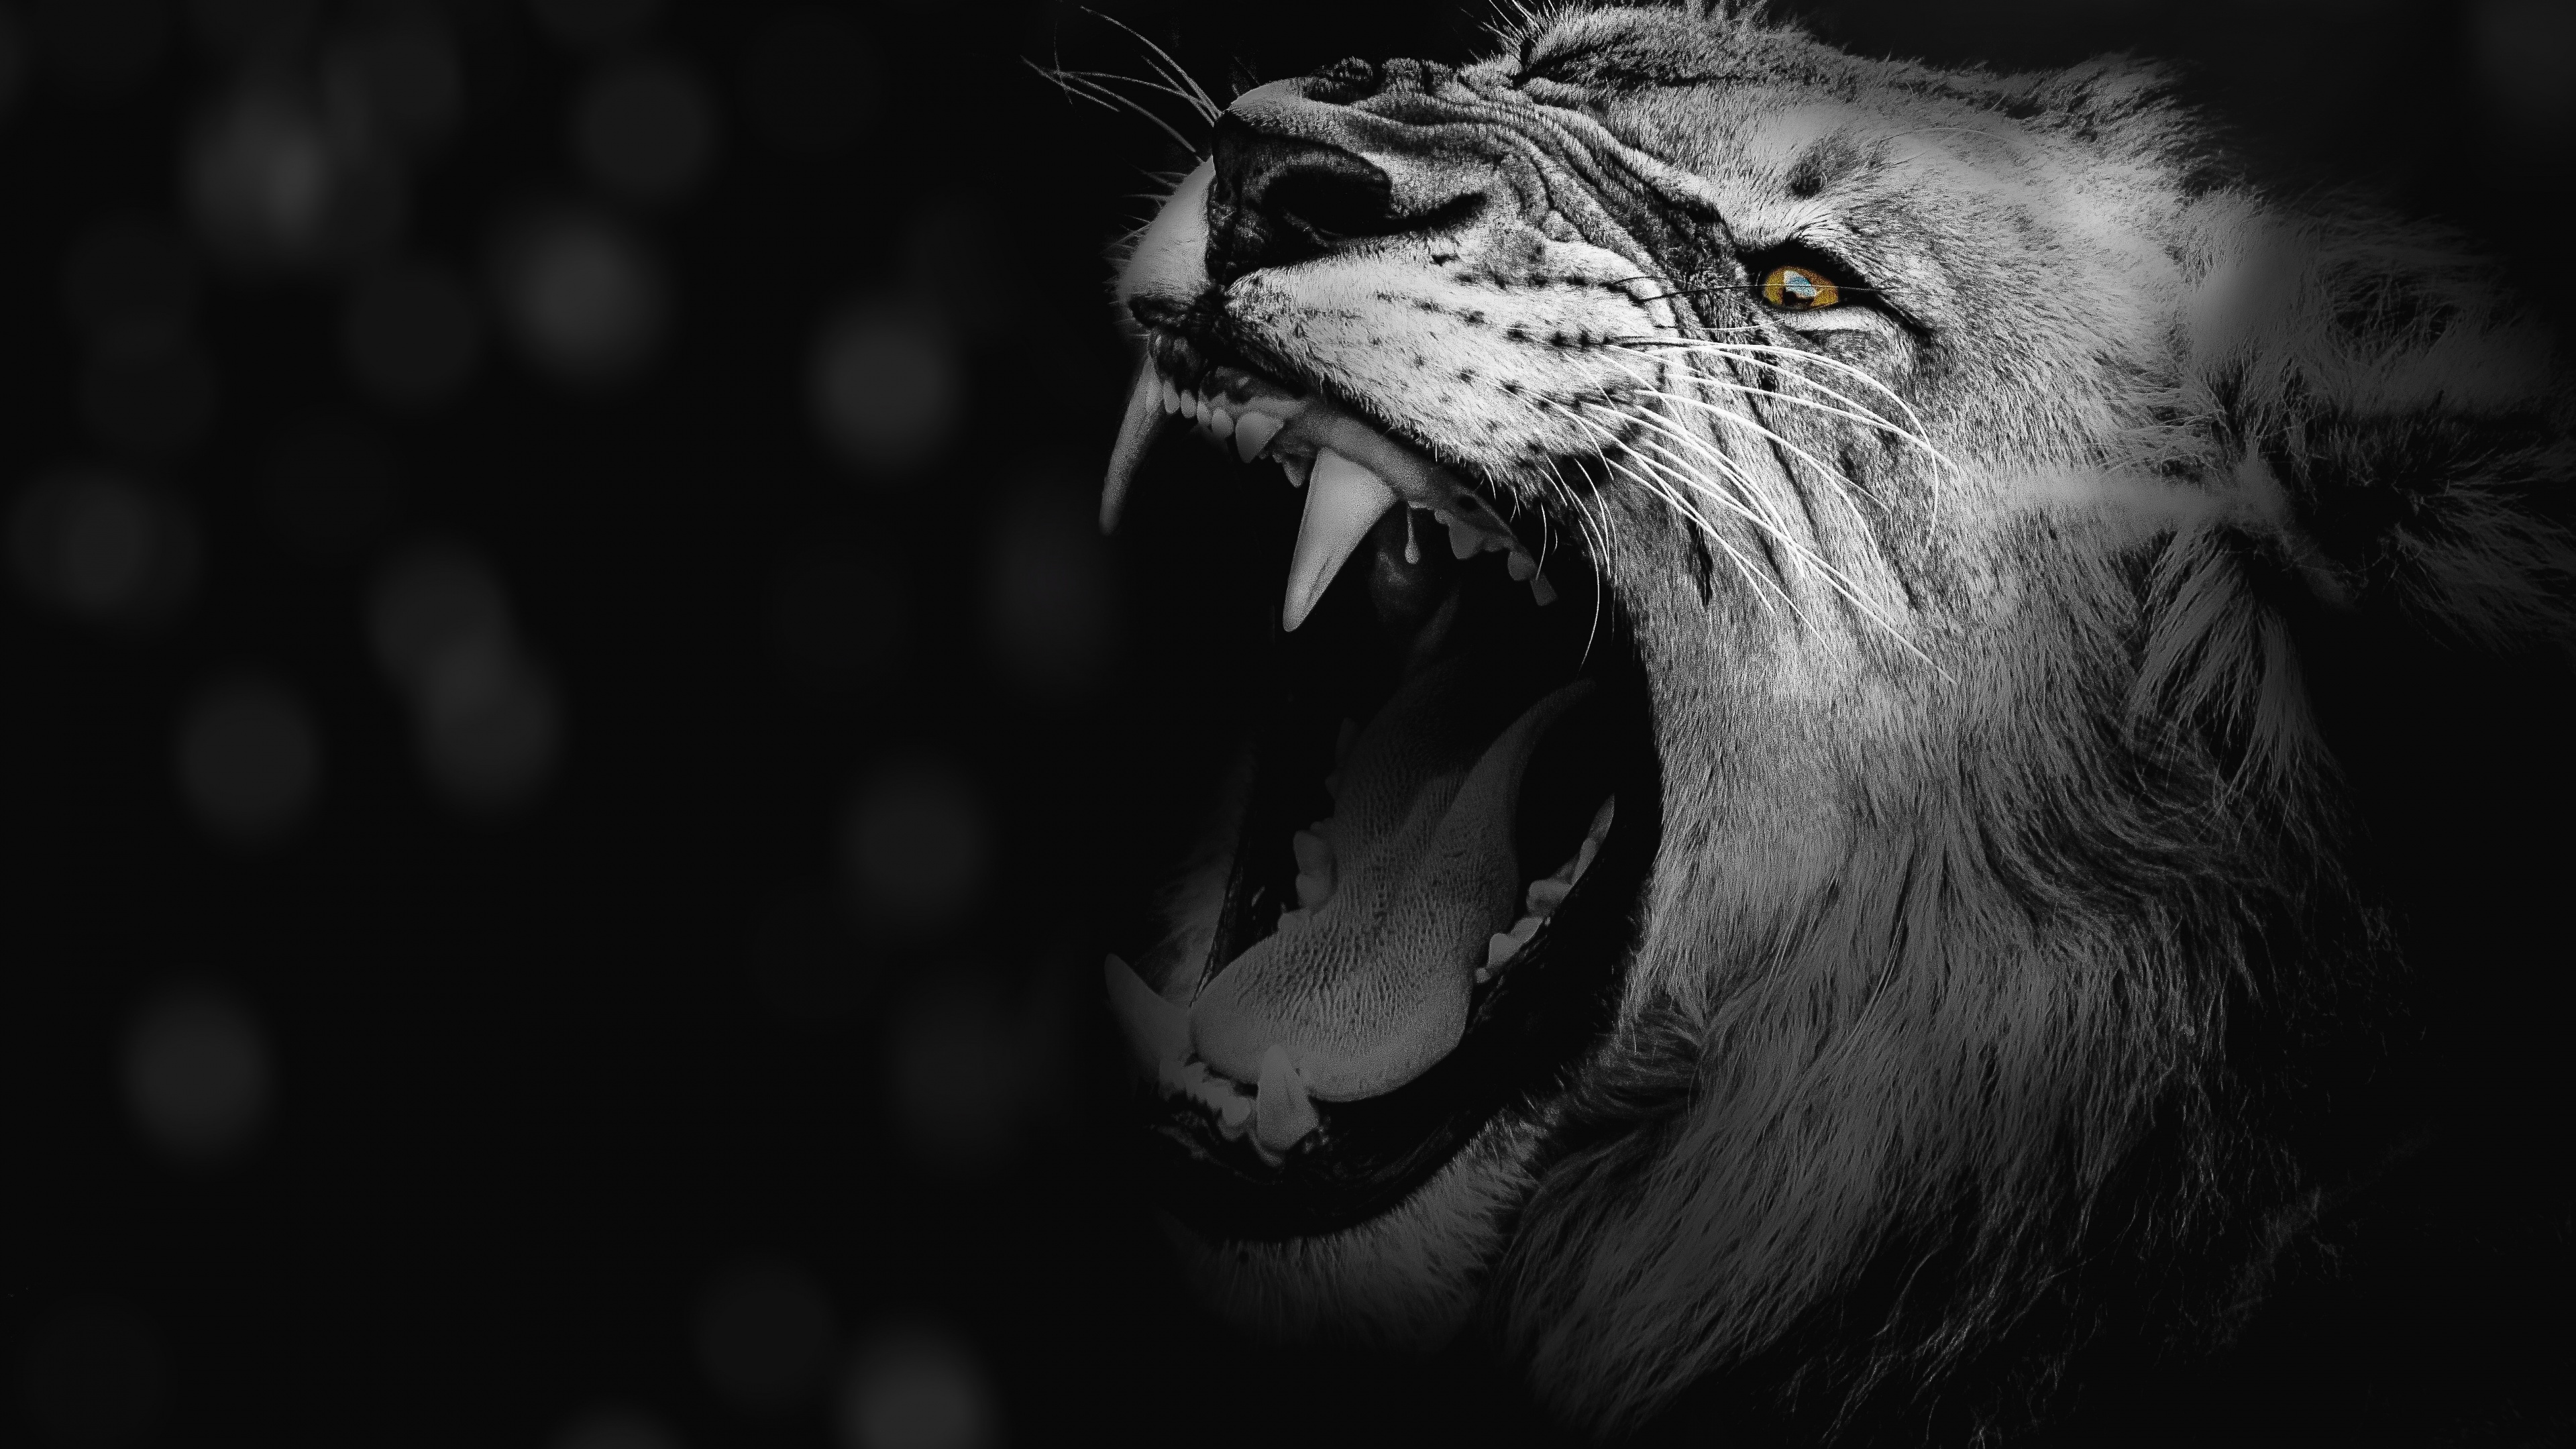 Roaring Lion Minimalist Wallpaper, HD Minimalist 4K Wallpapers, Images and  Background - Wallpapers Den